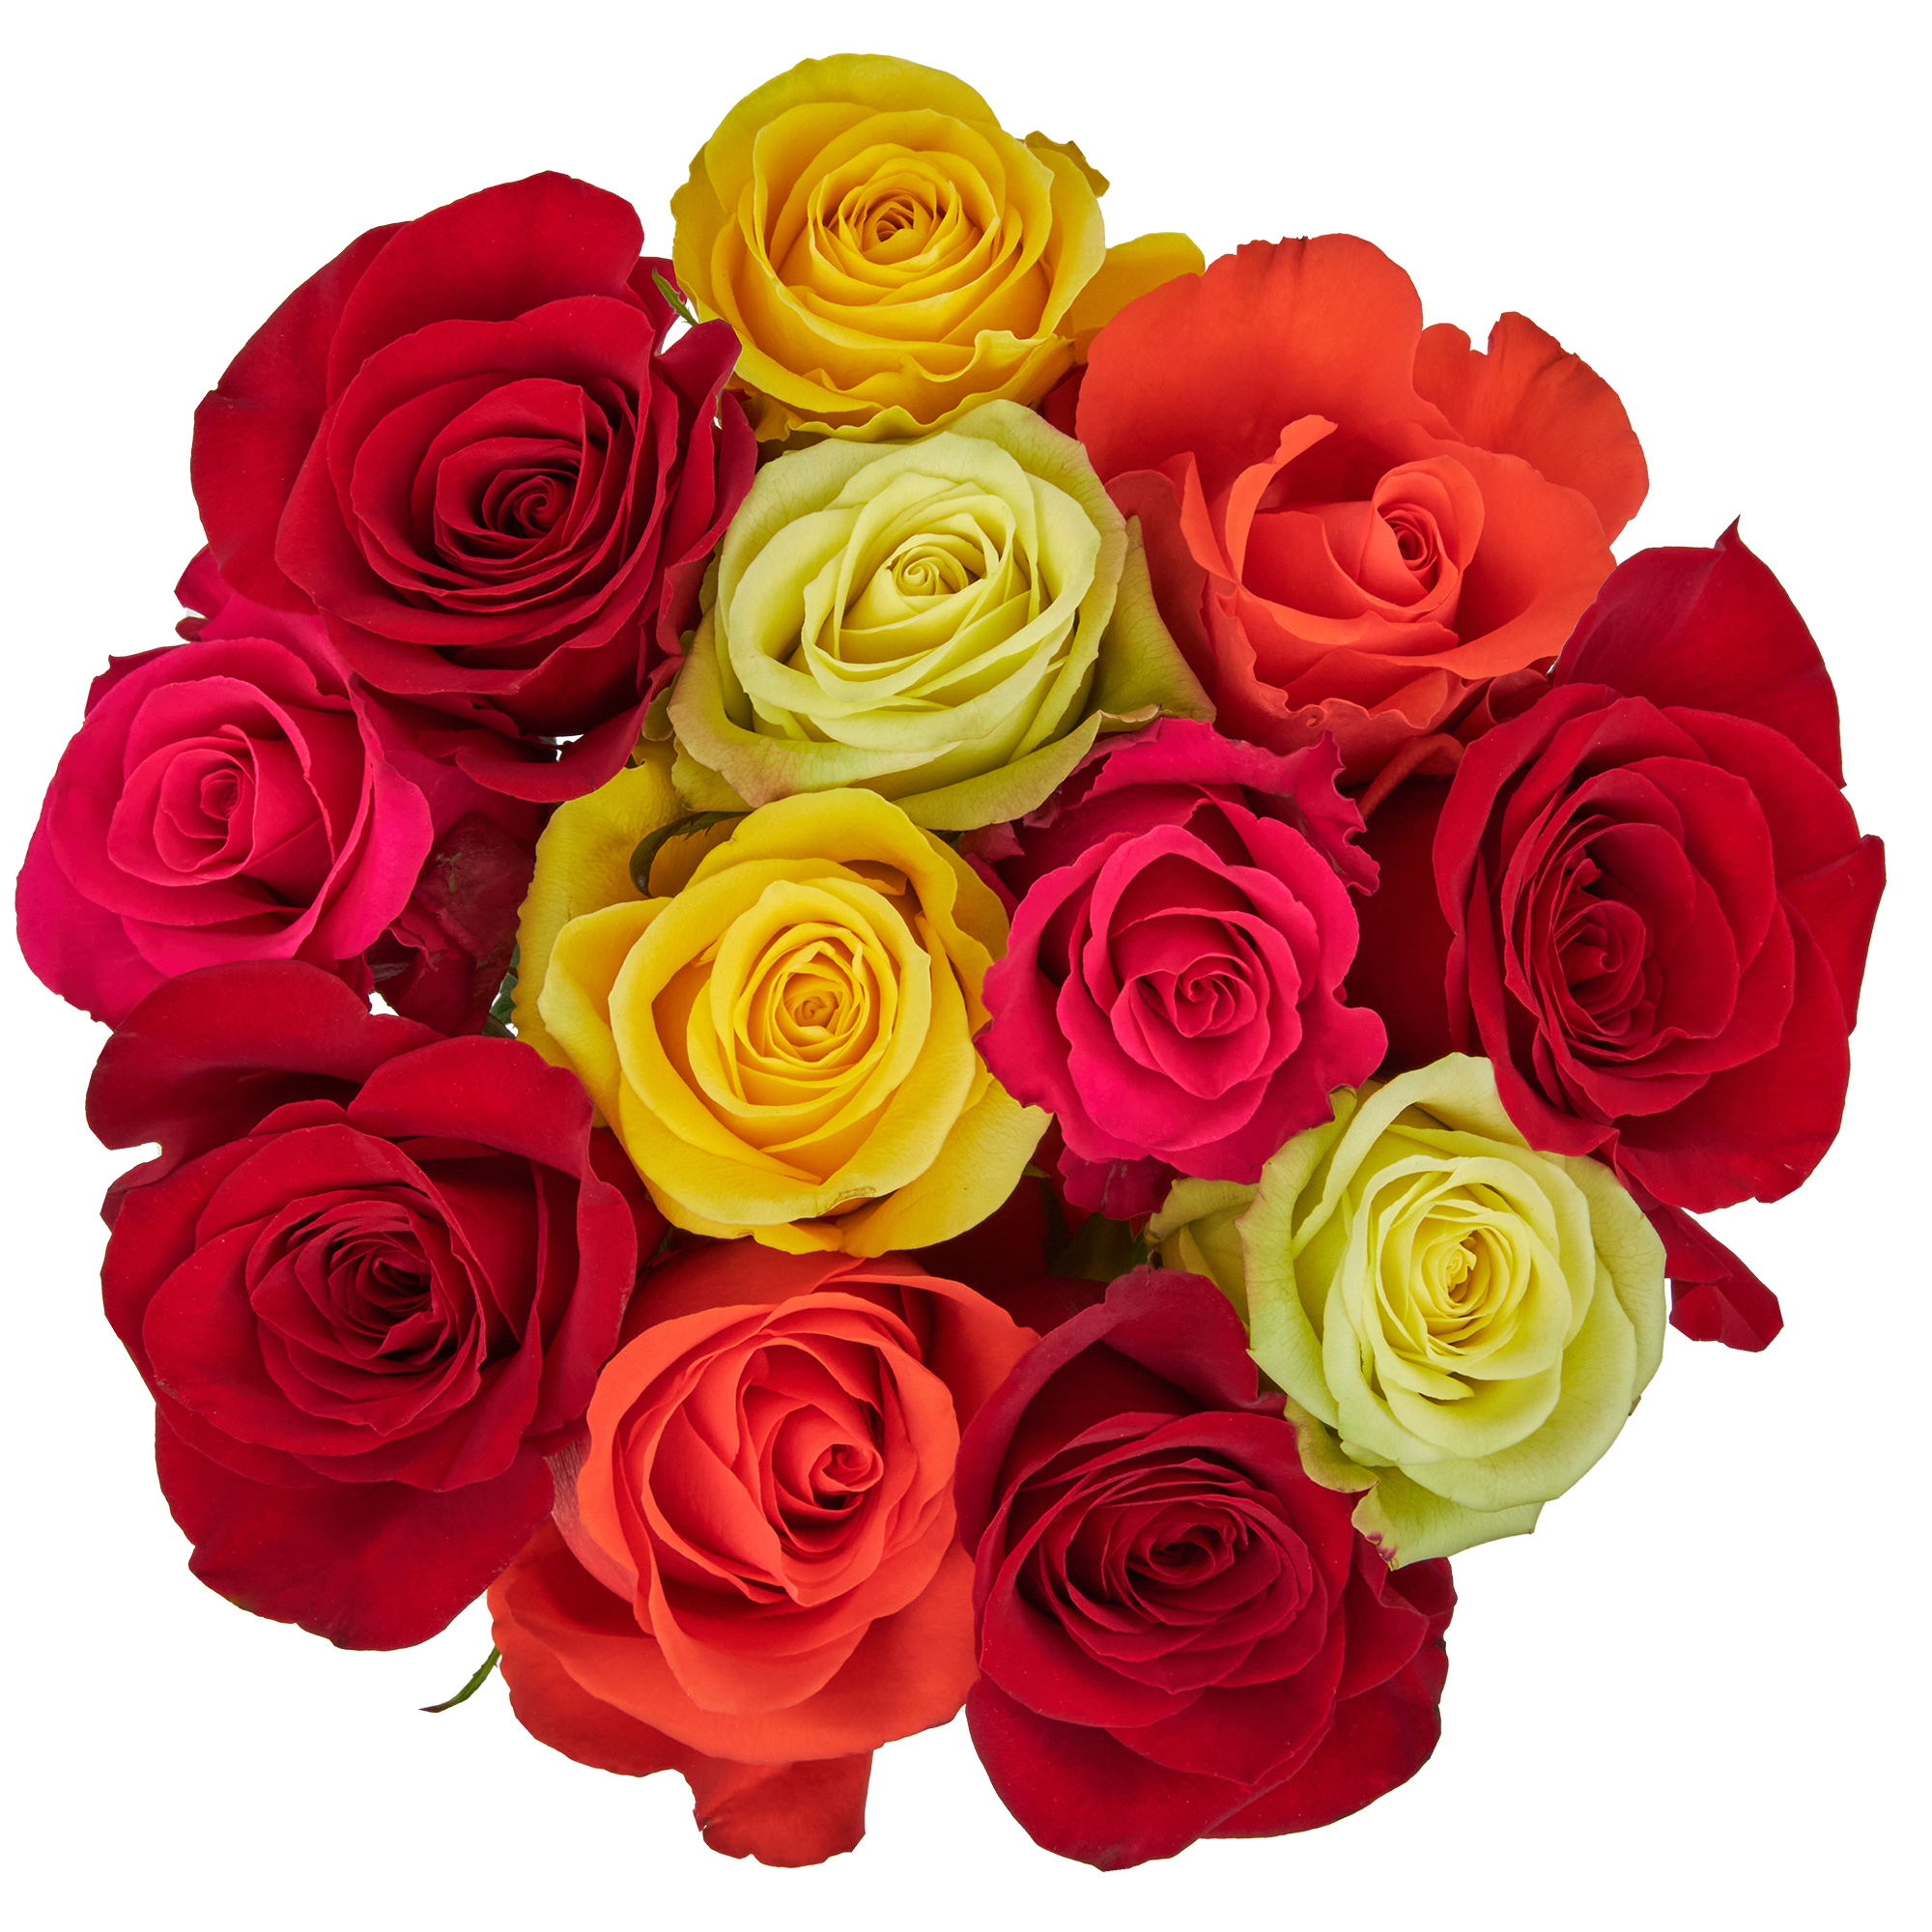 Fresh-Cut Dozen Roses, 12 Stems Assorted Rainbow Colors, Colors Vary - image 1 of 10